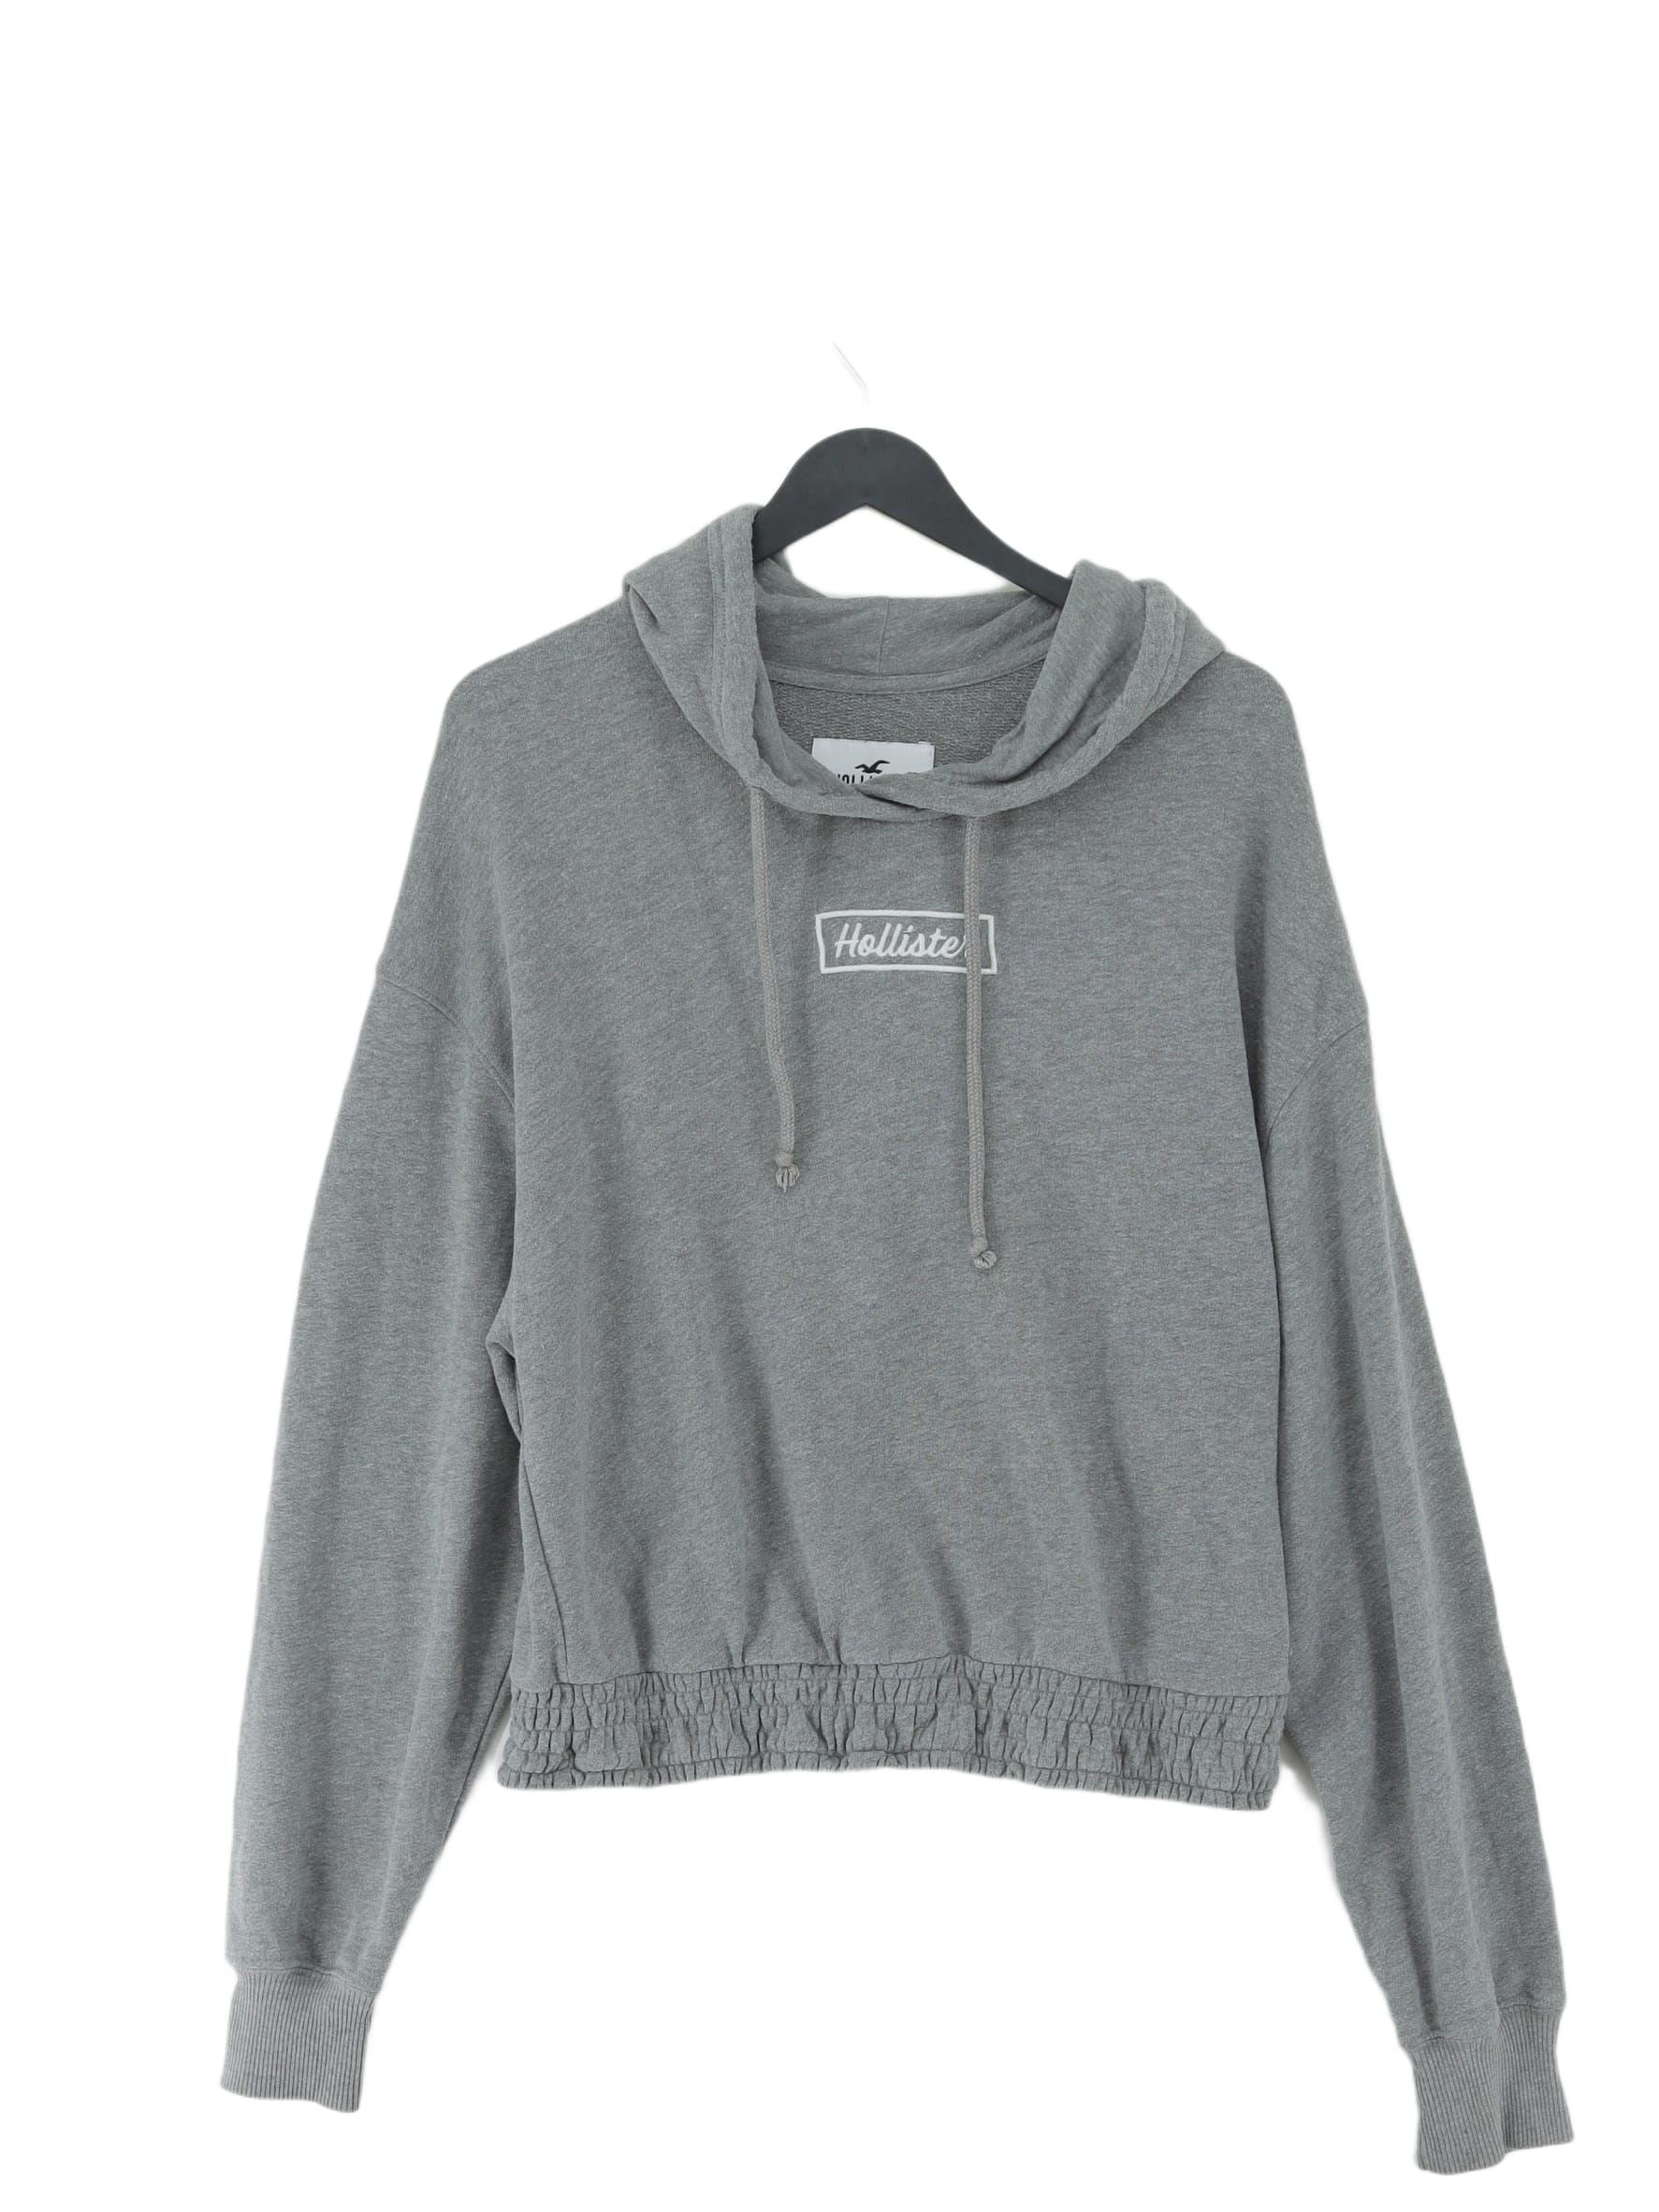 Hollister Women's Hoodie L Grey Cotton with Polyester